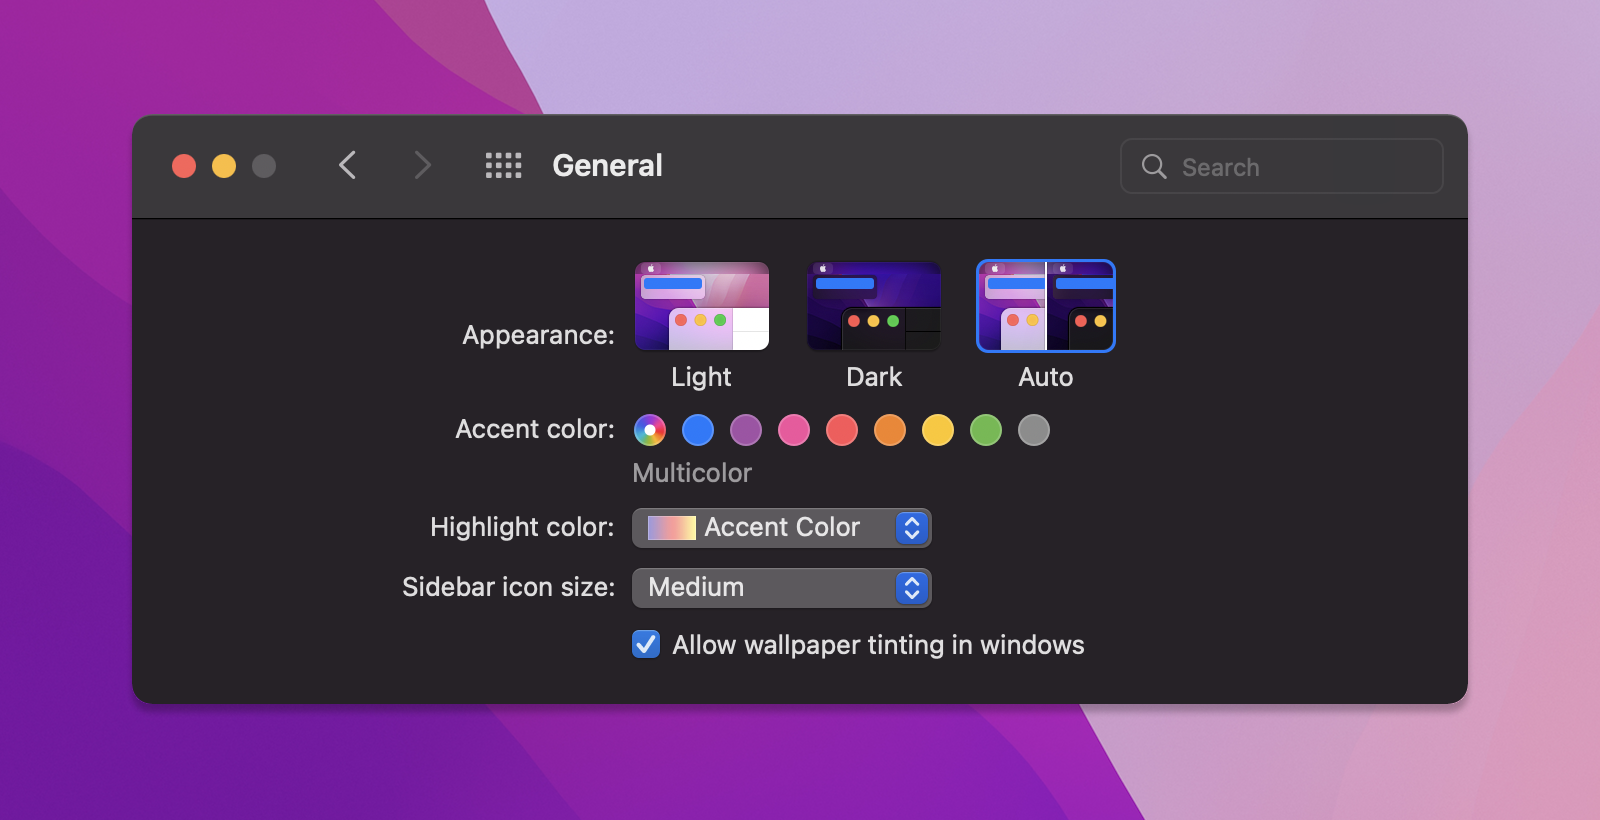 Dark mode as controlled by MacOS system preferences.